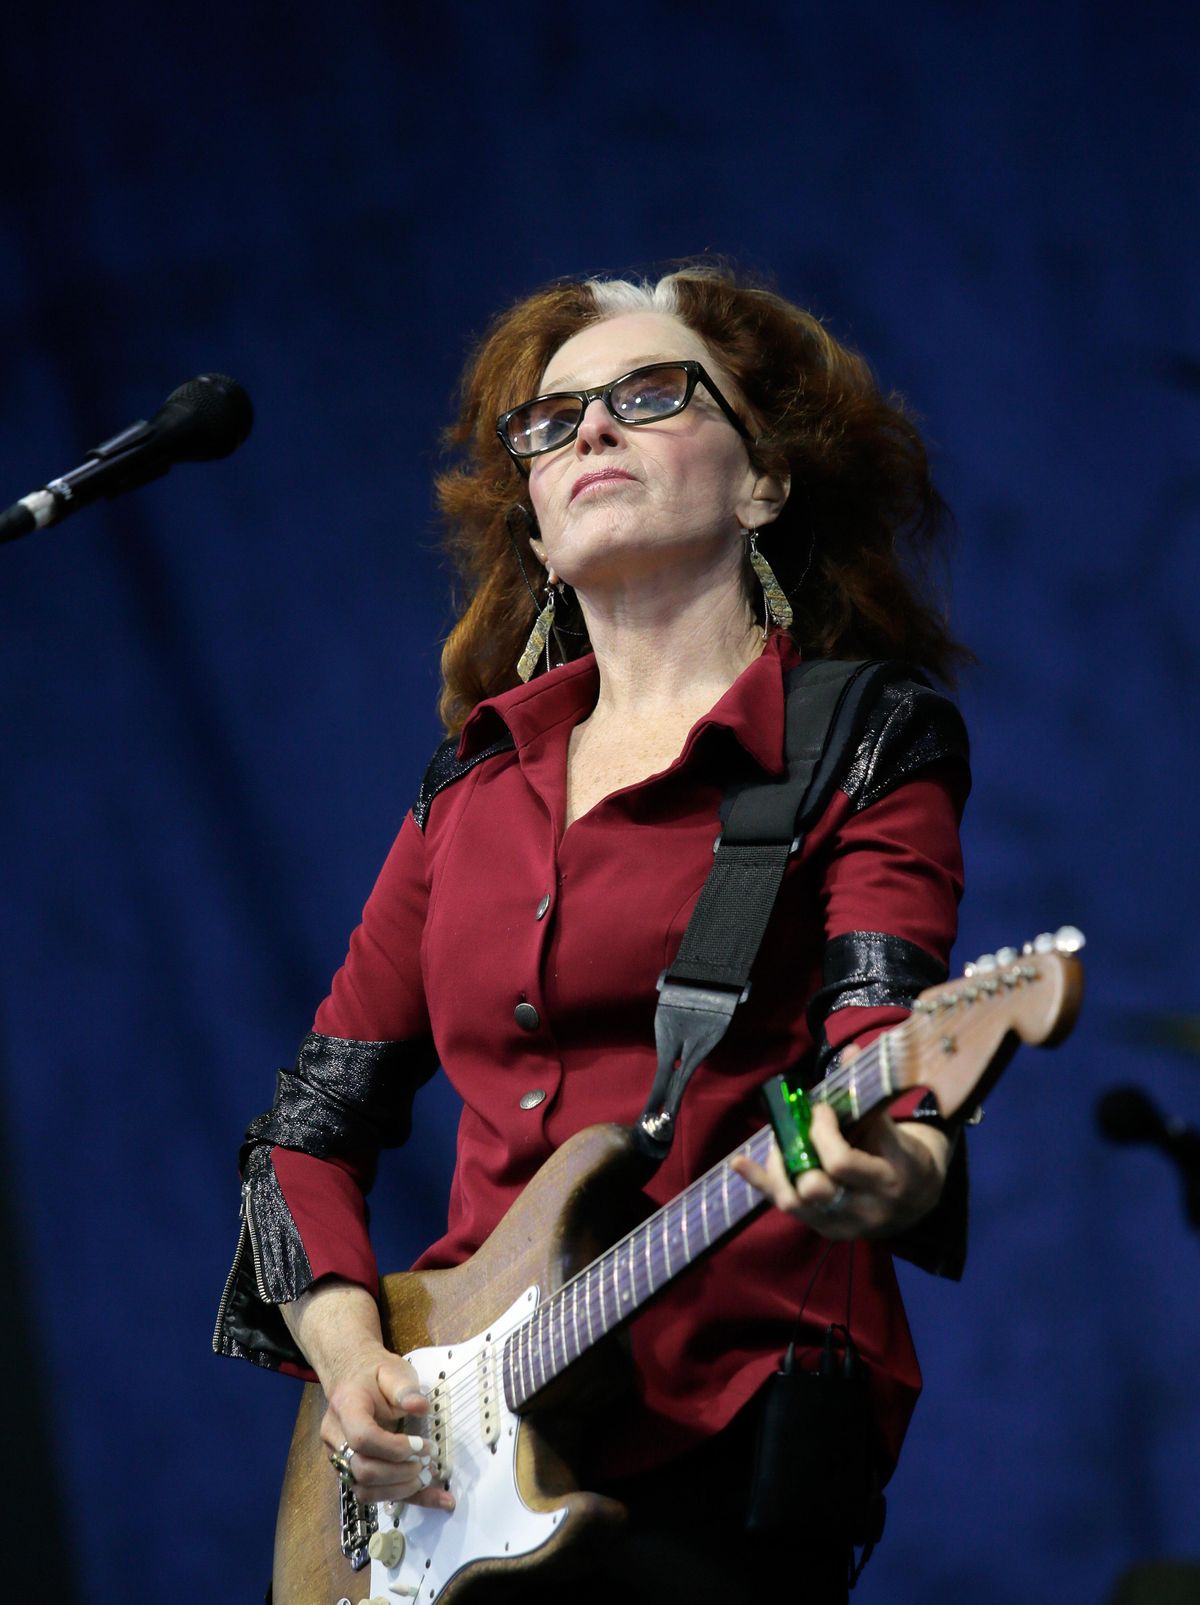 Bonnie Raitt performs on the Gentilly Stage during second Sunday of the New Orleans Jazz Fest at the Fair Grounds, Sunday, May 1, 2016. (David Grunfeld / Associated Press)